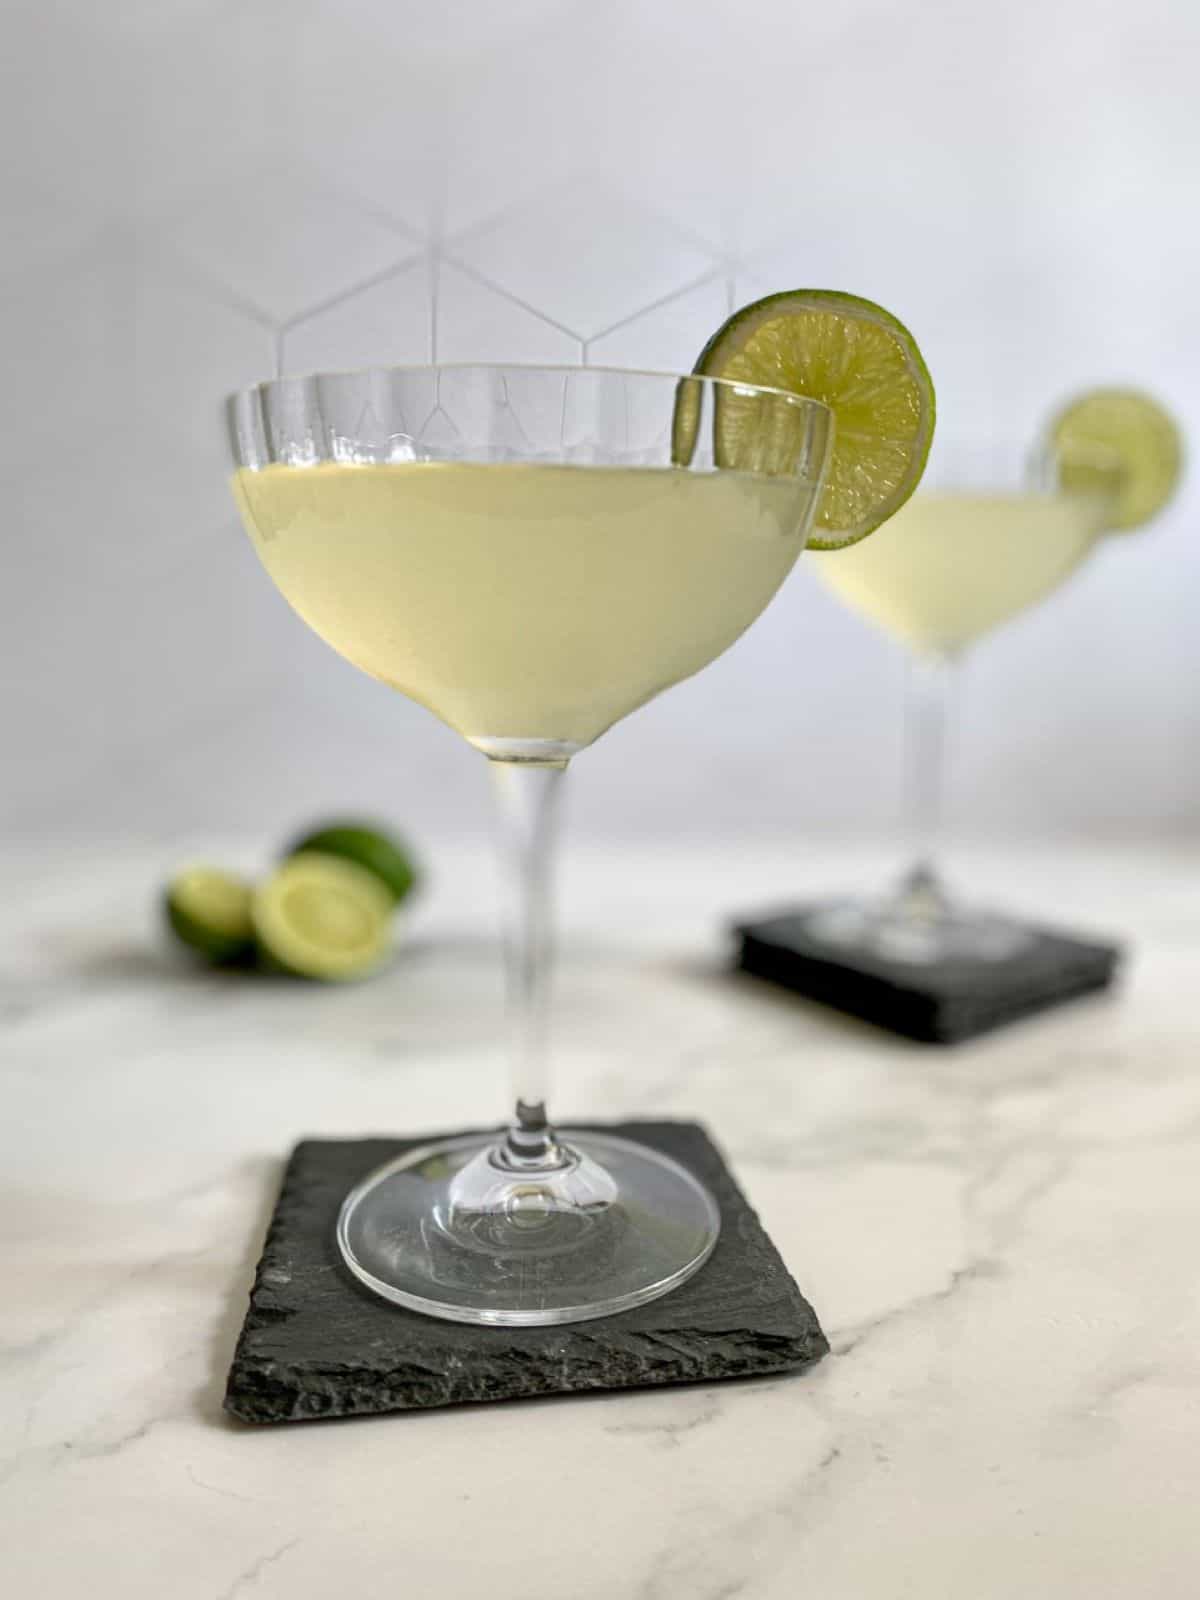 French gimlet cocktail with a lime wedge garnish is in the forefront with a second cocktail and lime wedges in the background.